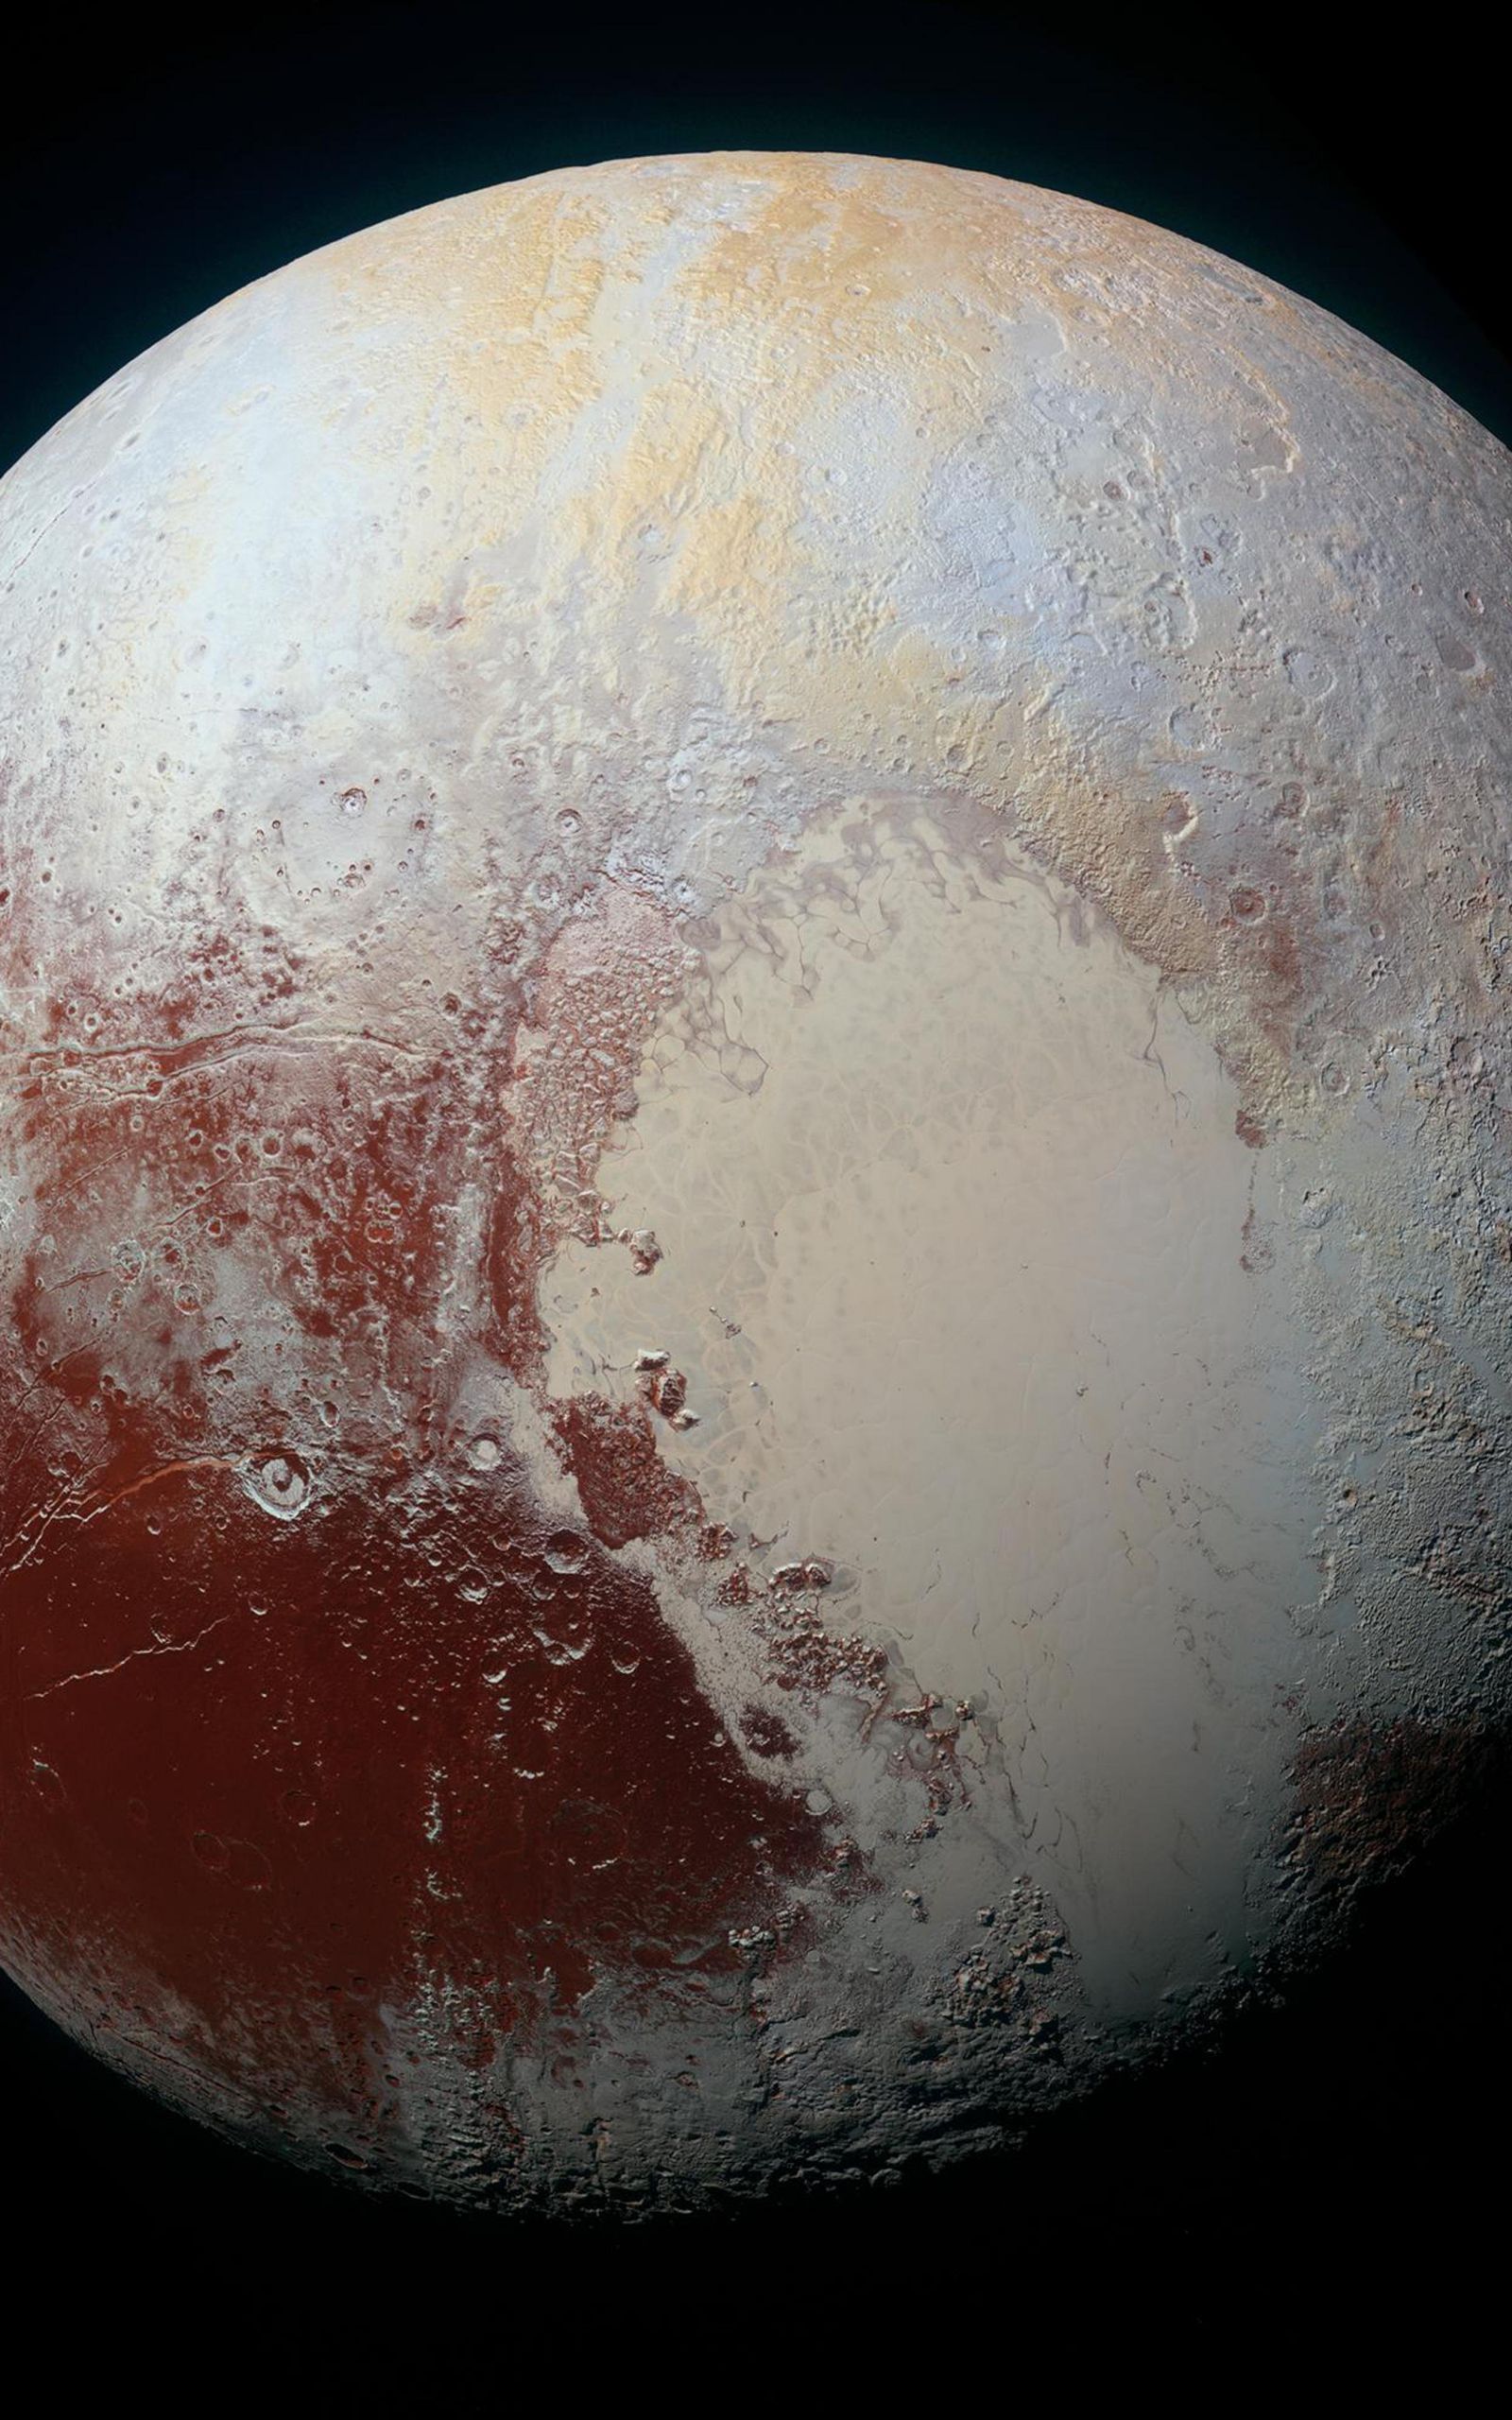 8k Nasa Picture Of Pluto - New Horizons Spacecraft Of Pluto Or Its Moons - HD Wallpaper 